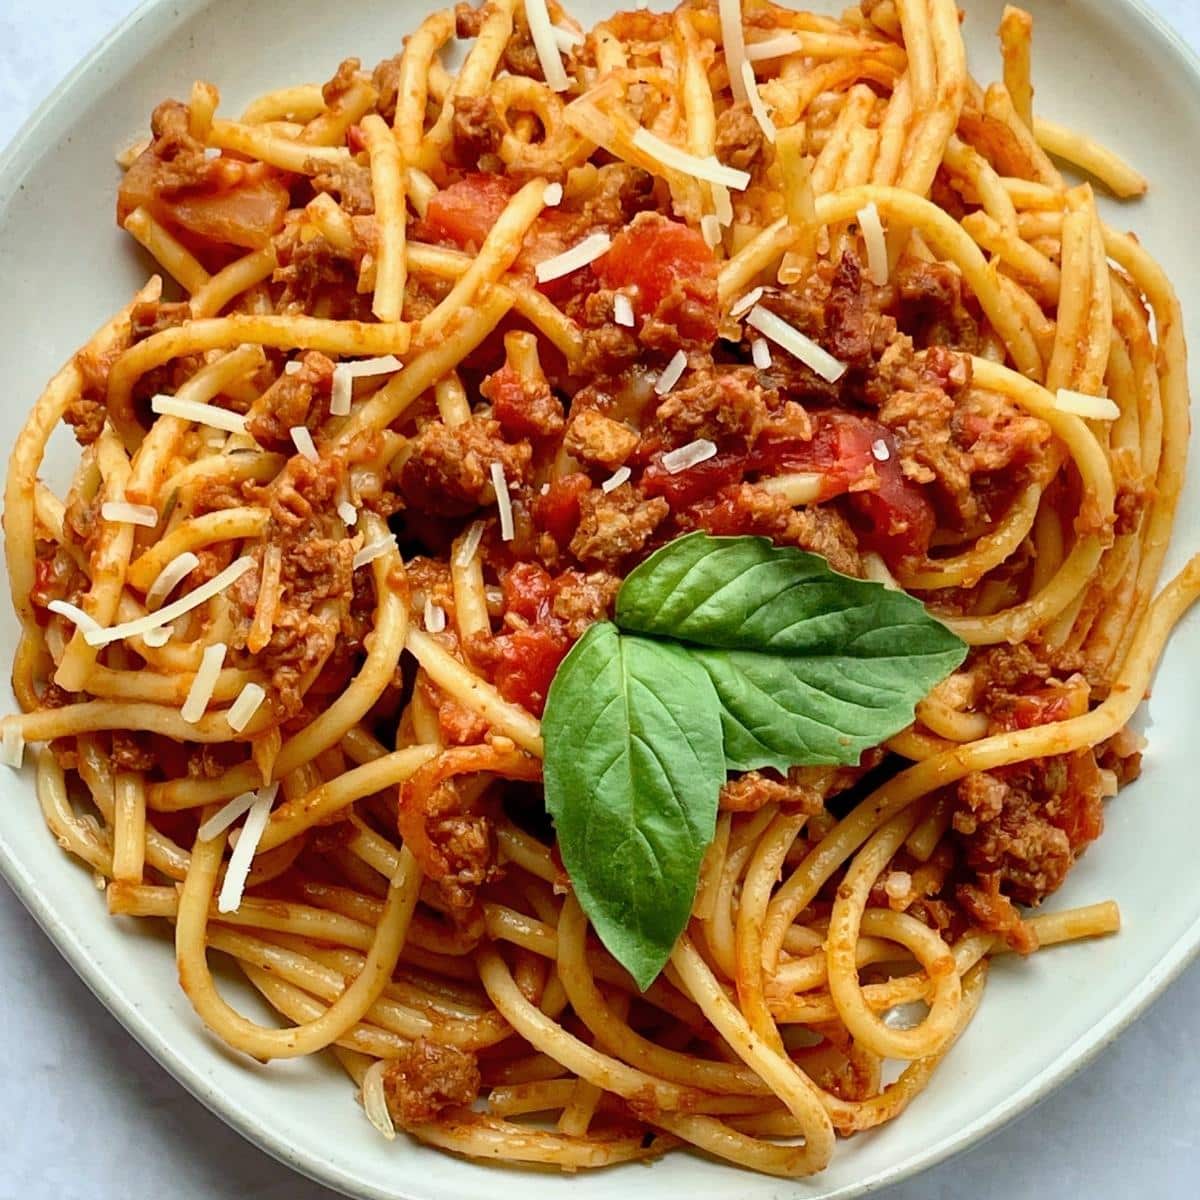 Plate with vegan baked spaghetti.